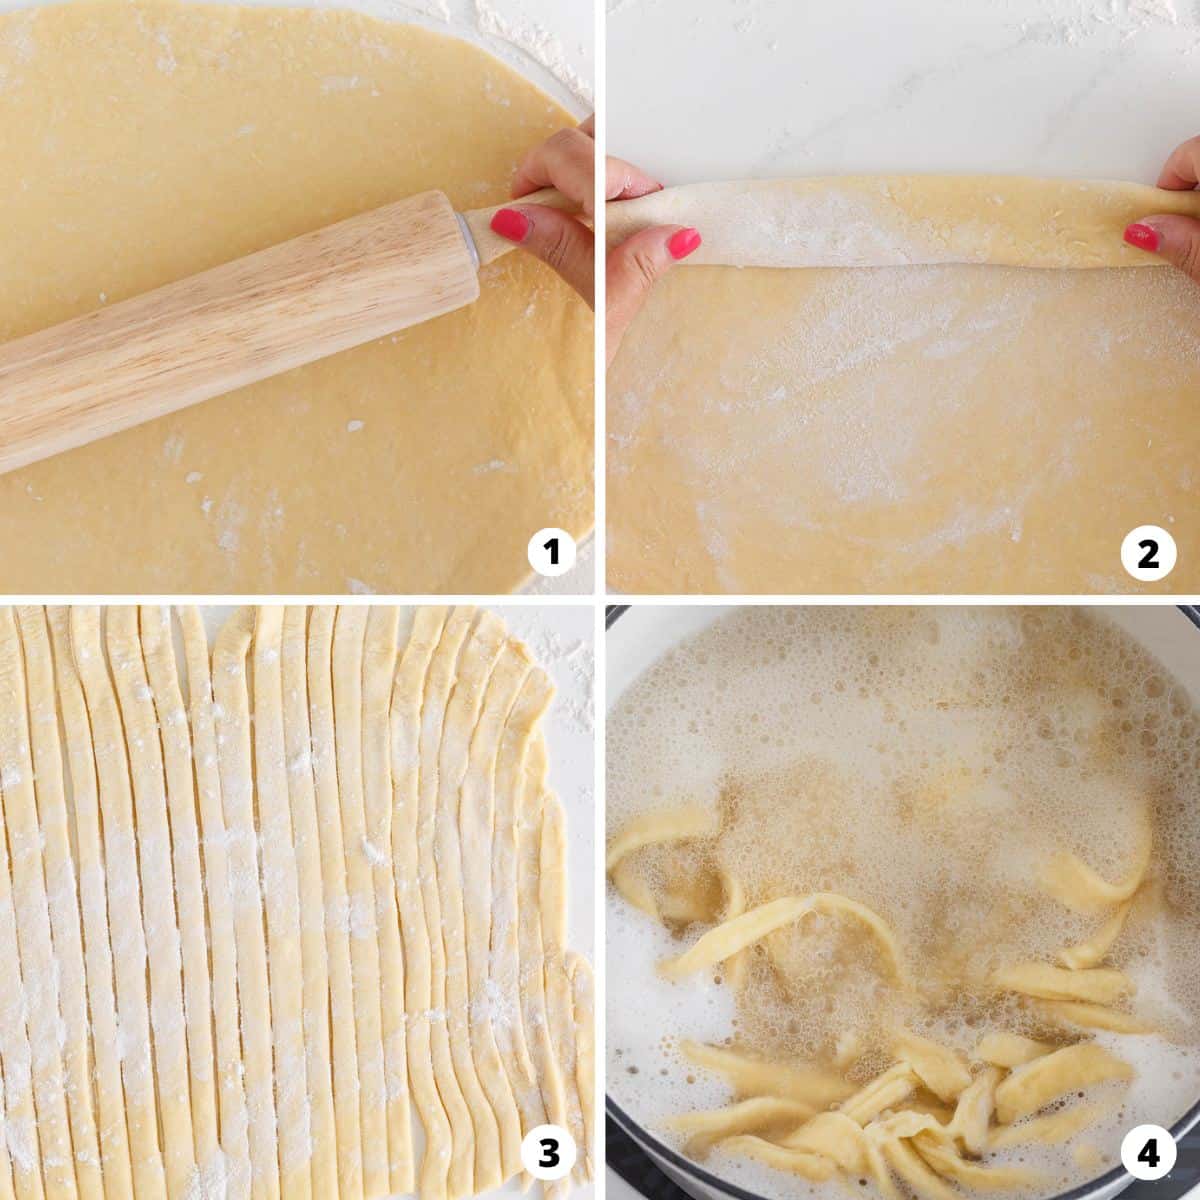 Showing how to make egg noodles in a 4 step collage.